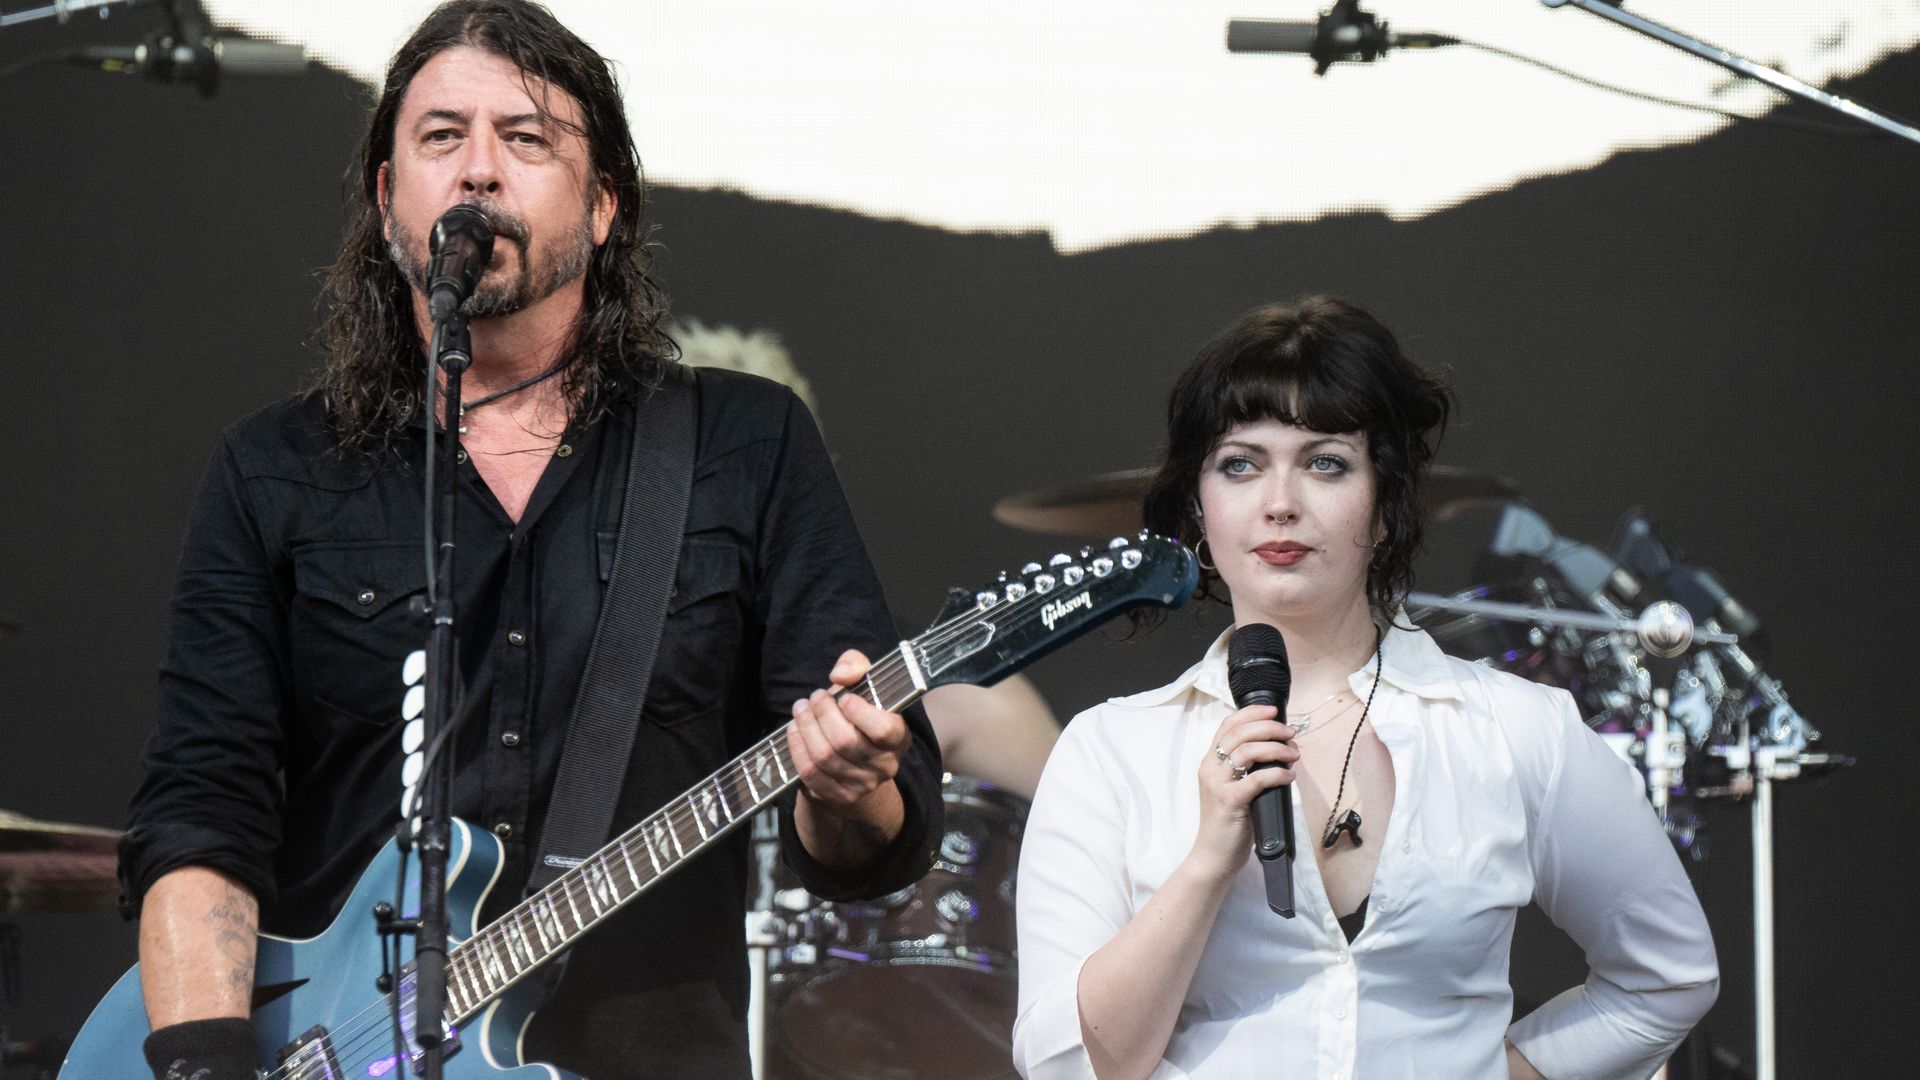 Foo Fighters' Dave Grohl's daughter Violet, 17, surprises fans with